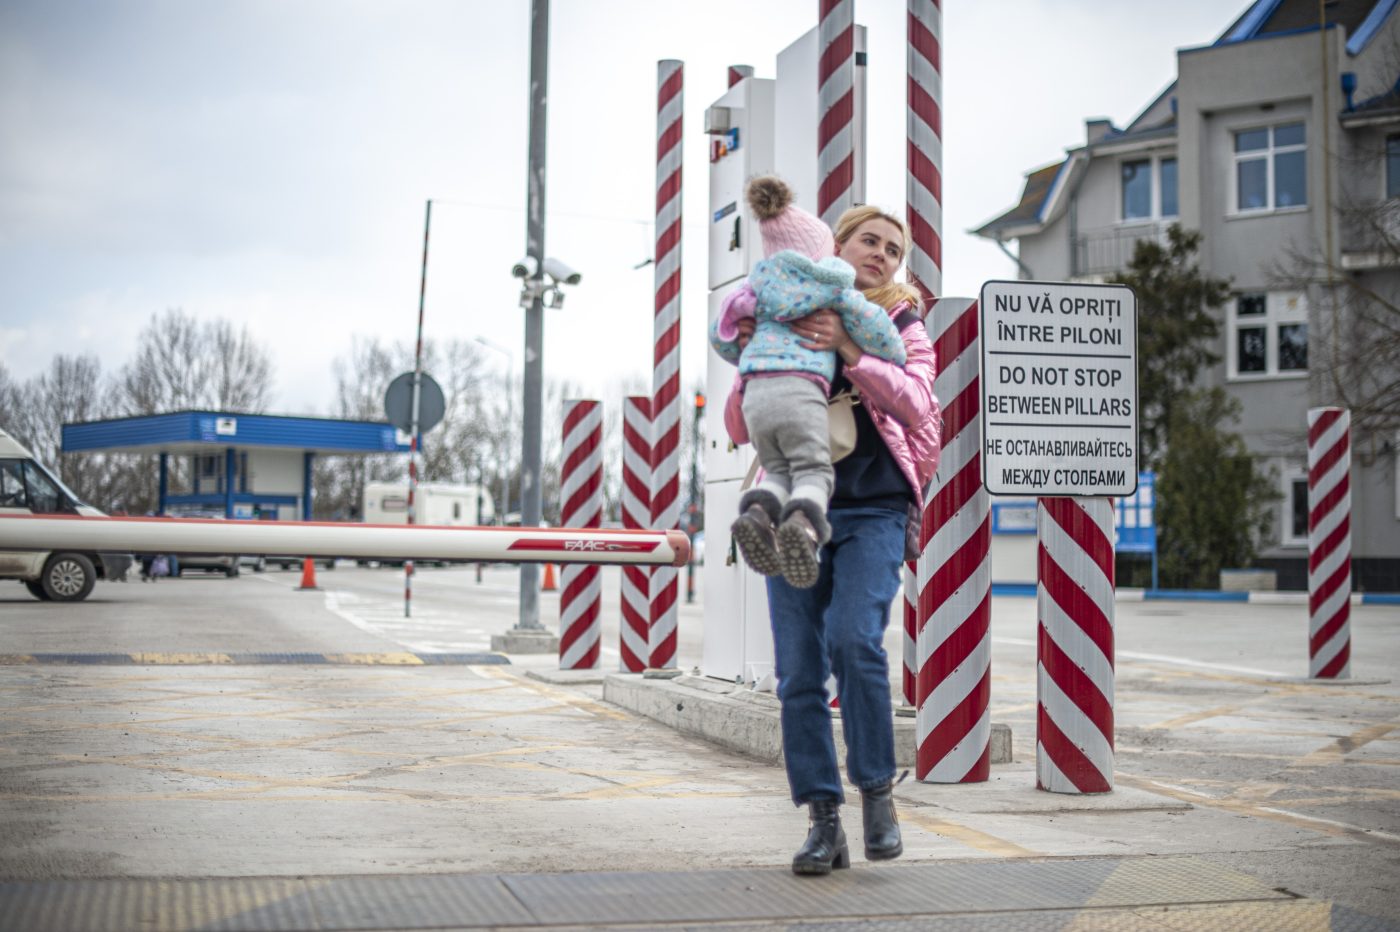 Photo: Ukrainian woman, who fled the war with her son, after crossing the border into Moldova, waiting to be transported to a reception centre. Palanca, territorial border between Moldova and Ukraine on March 18, 2022. Credit: Andrea Mancini/NurPhoto